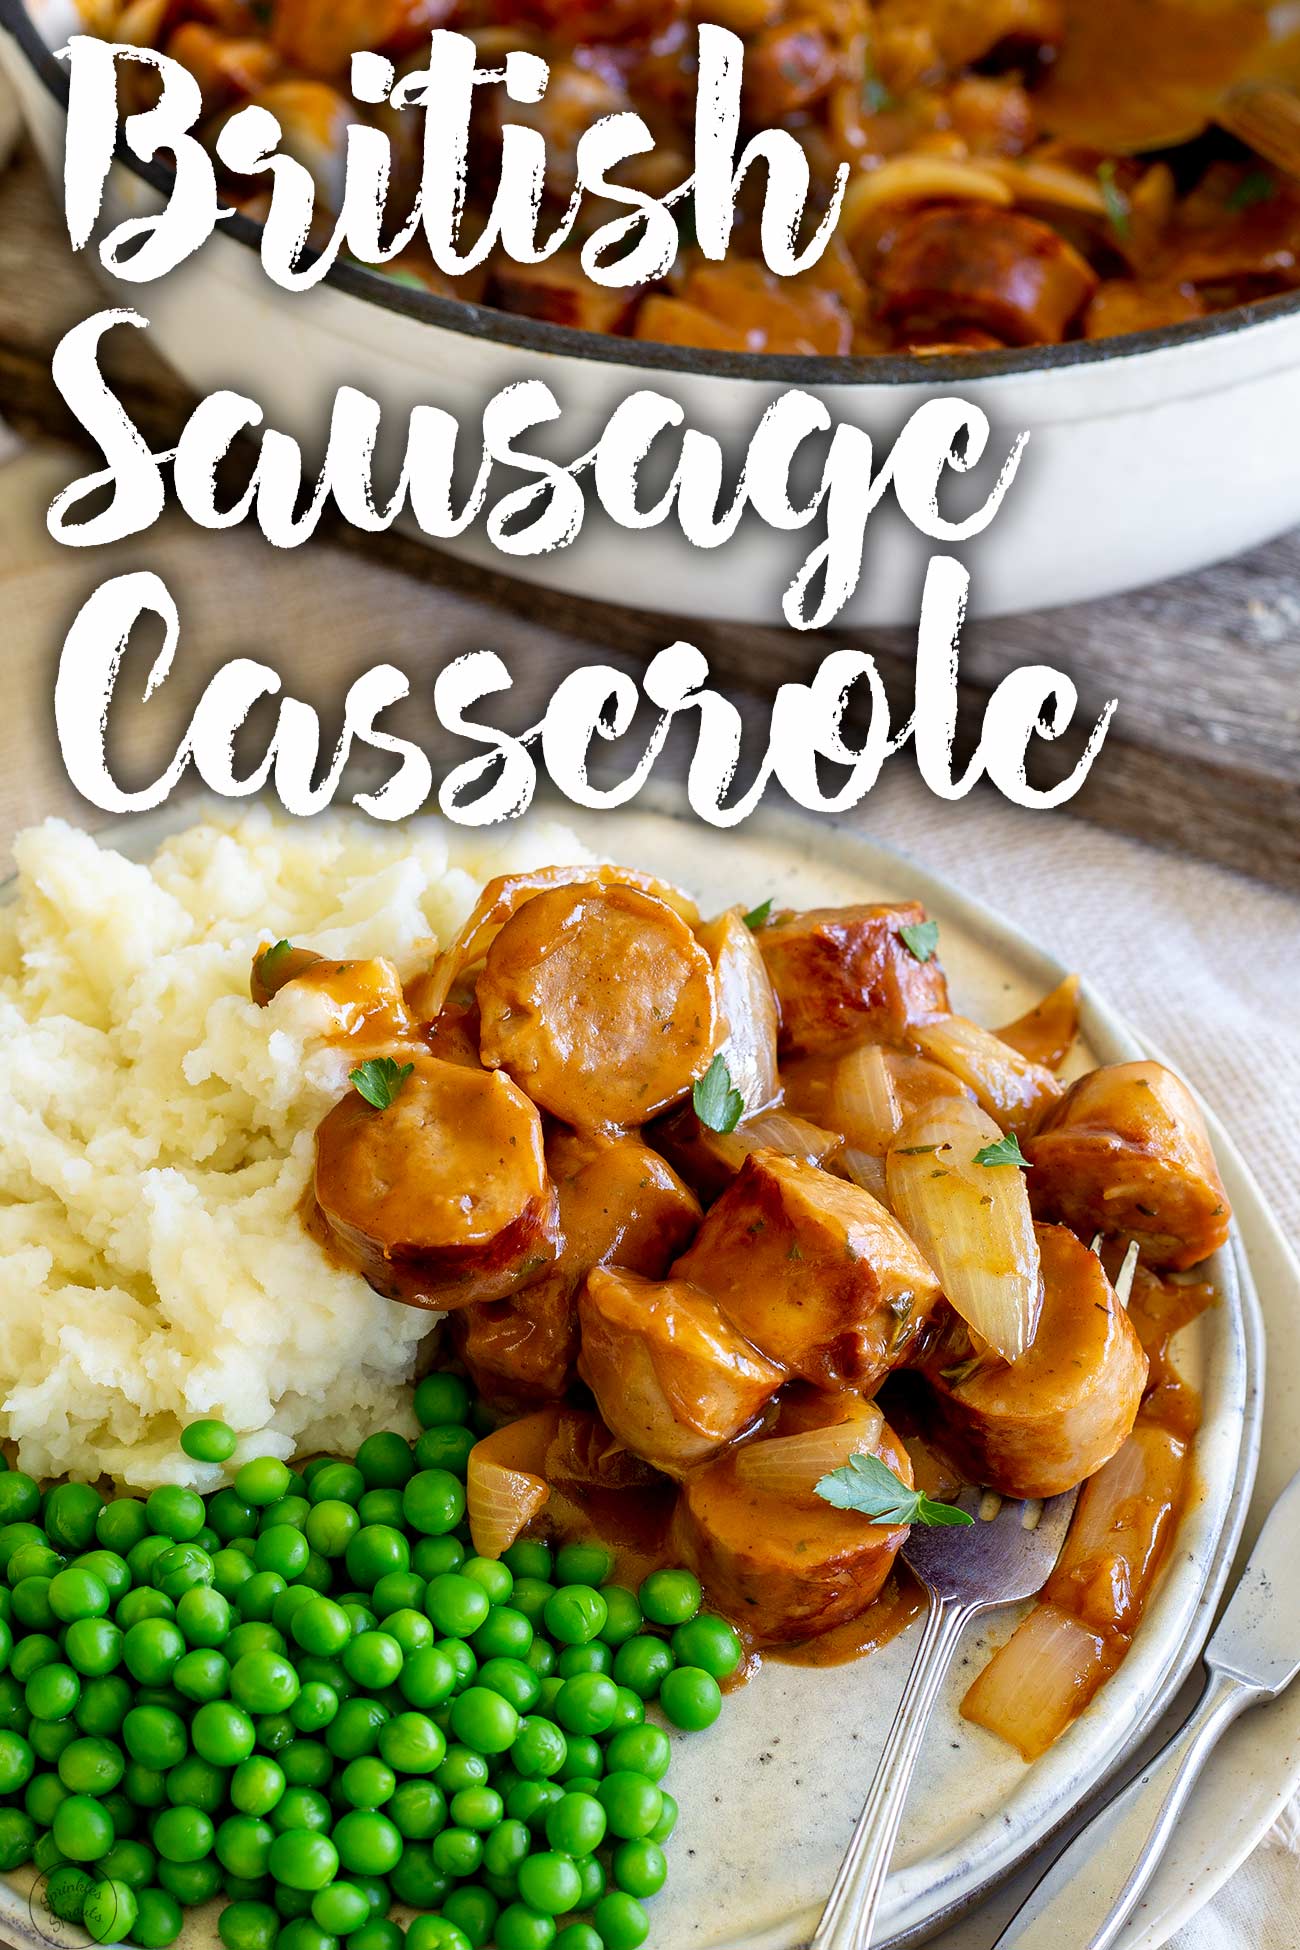 PINTEREST IMAGE: Sausage casserole with text overlay